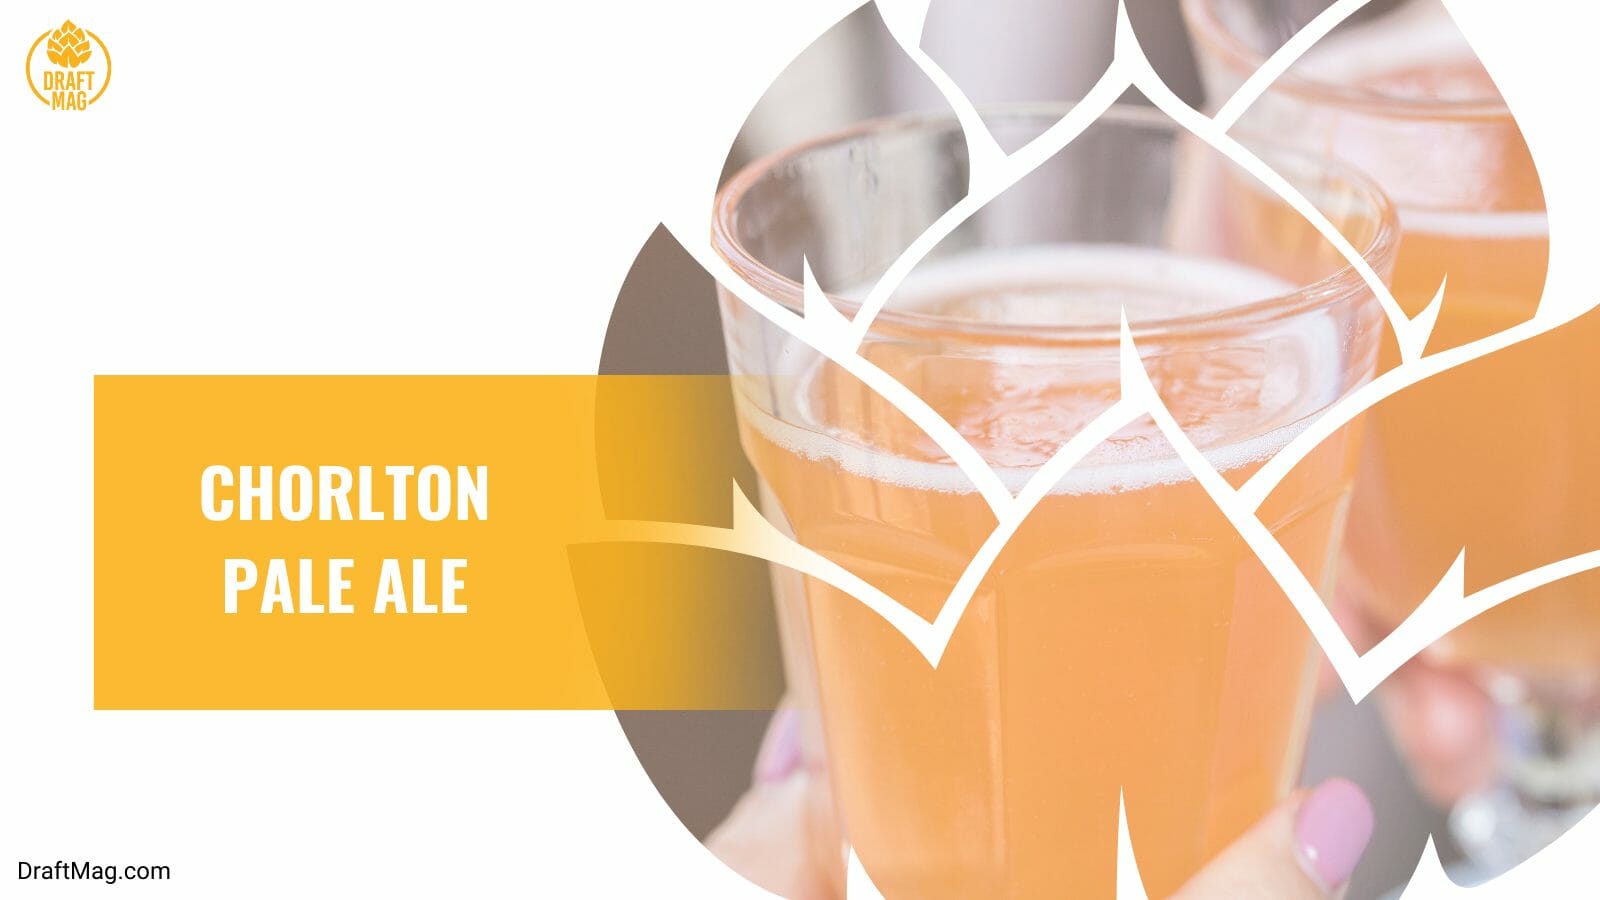 Chorlton pale ale with amber color